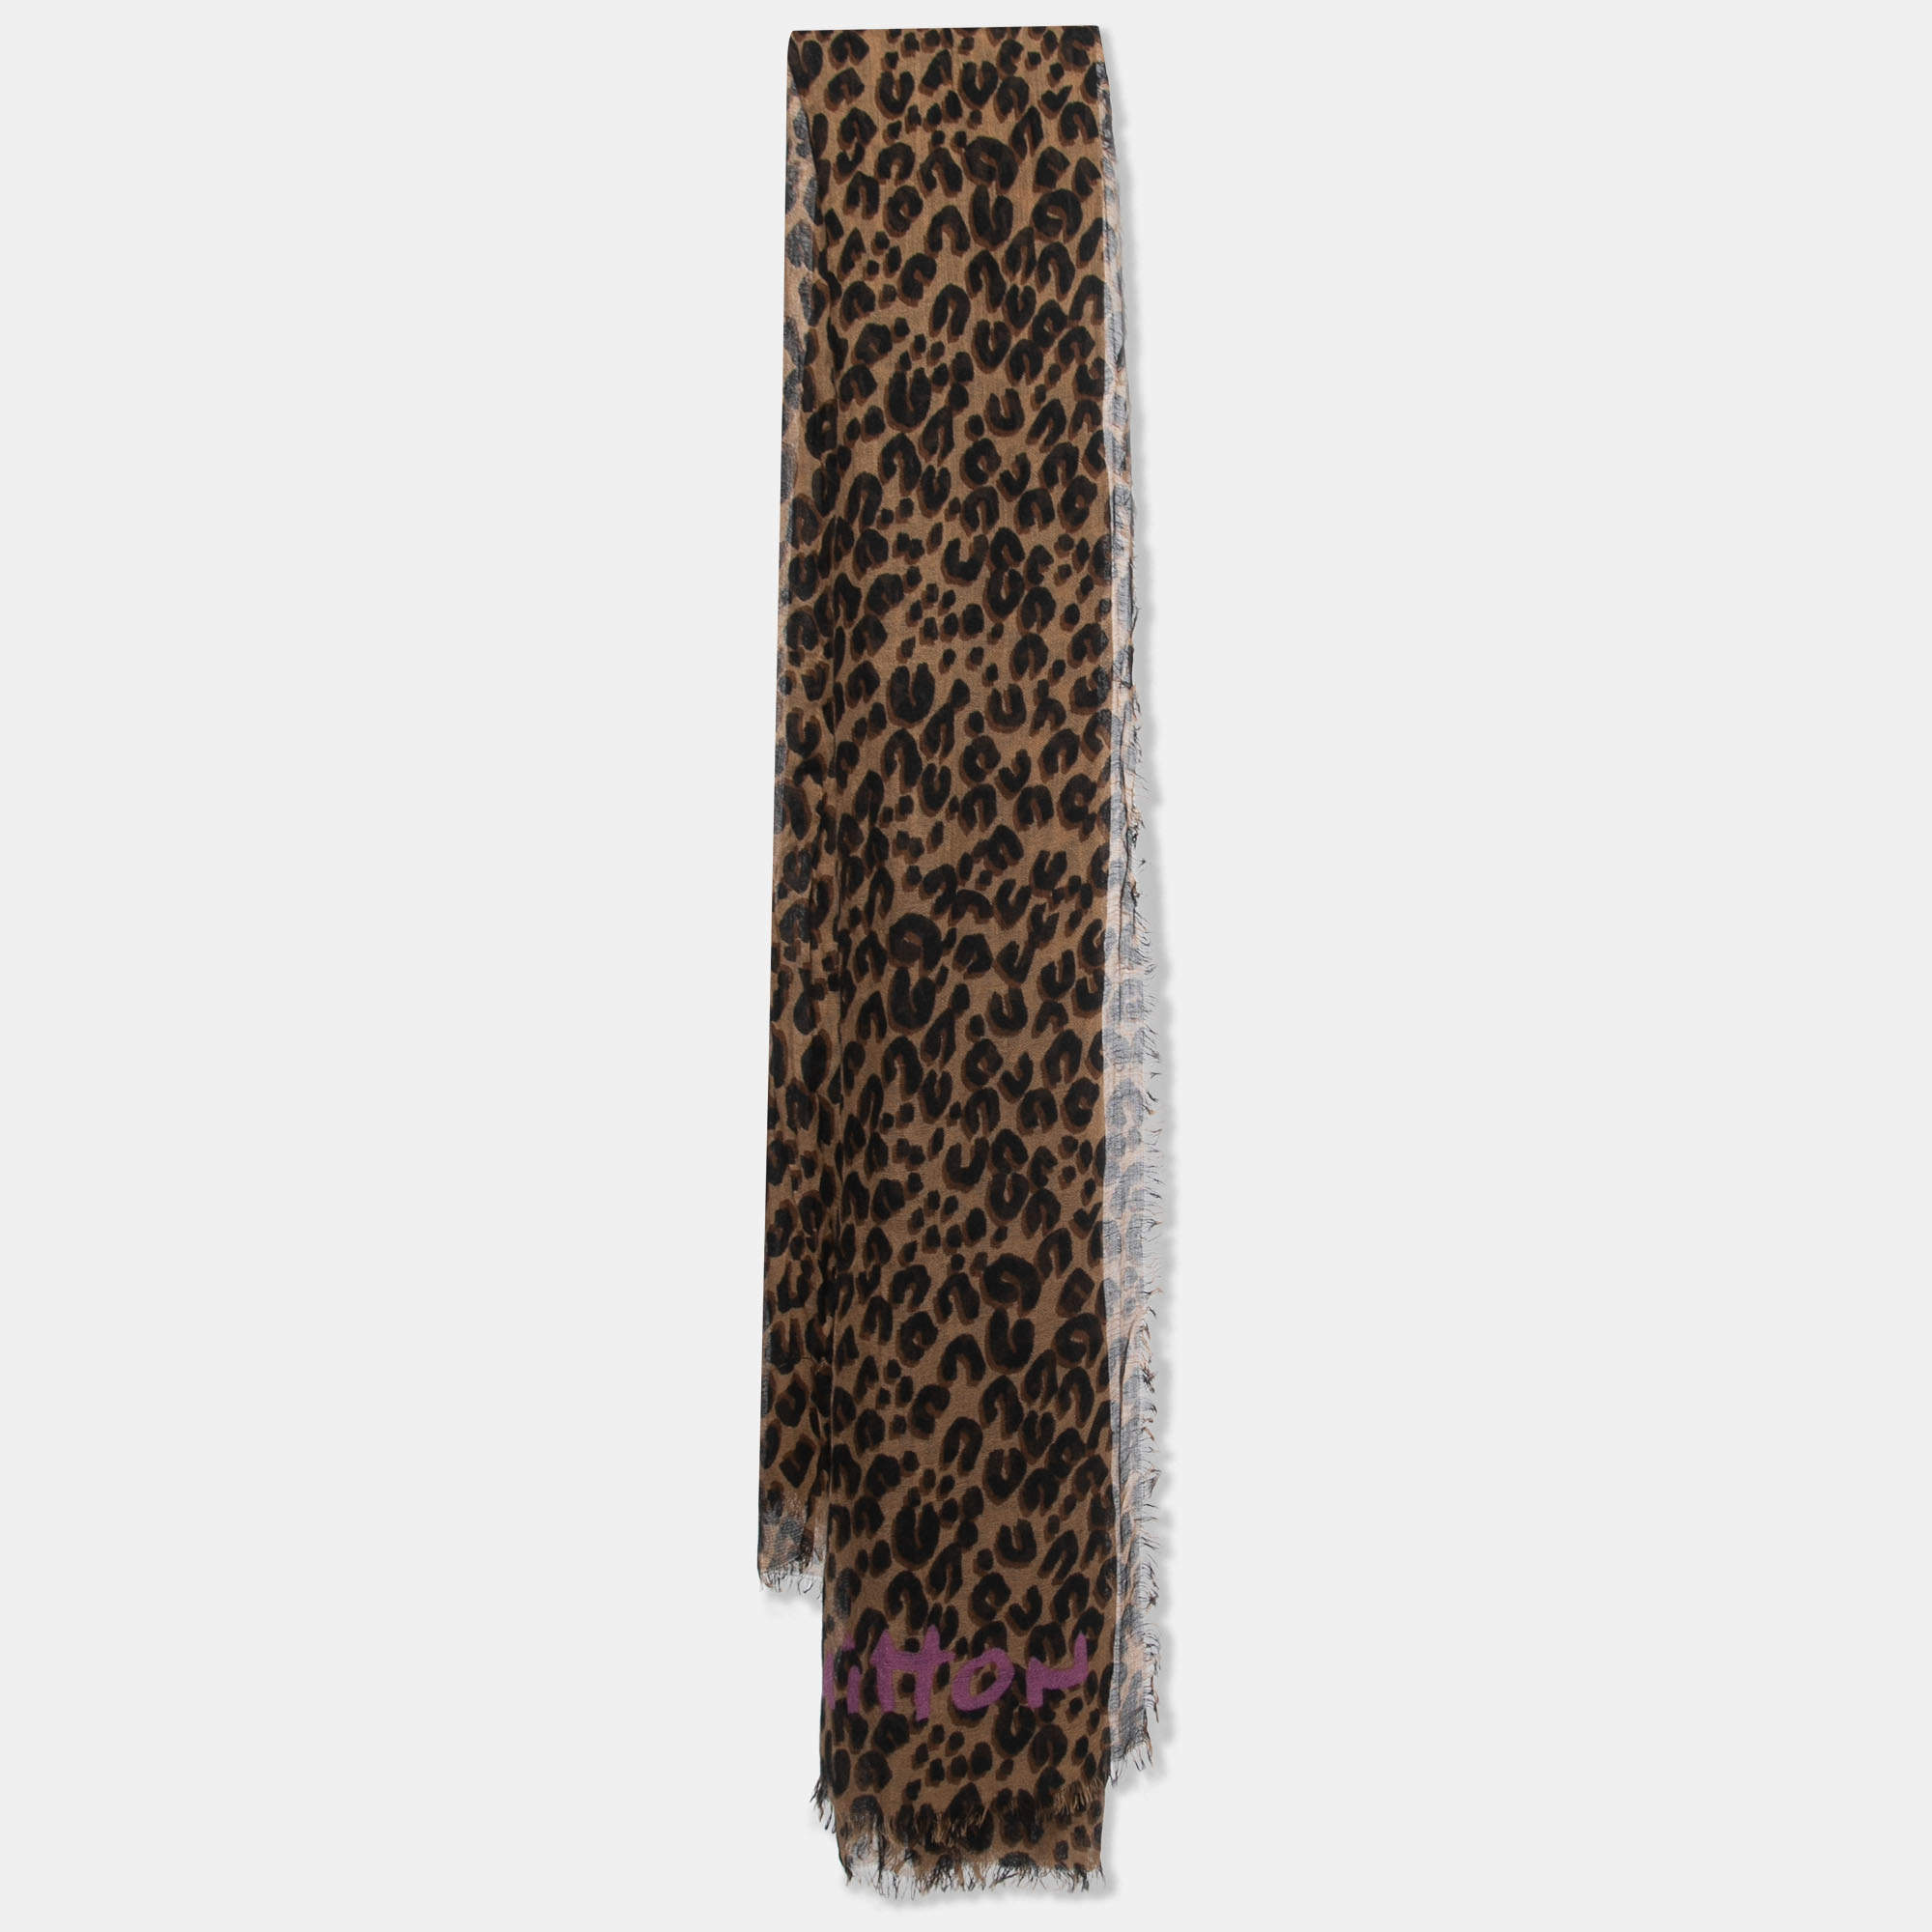 LOUIS VUITTON - Fashion THE LEOPARD STOLE IN NEW IRRESISTIBLE SHADES